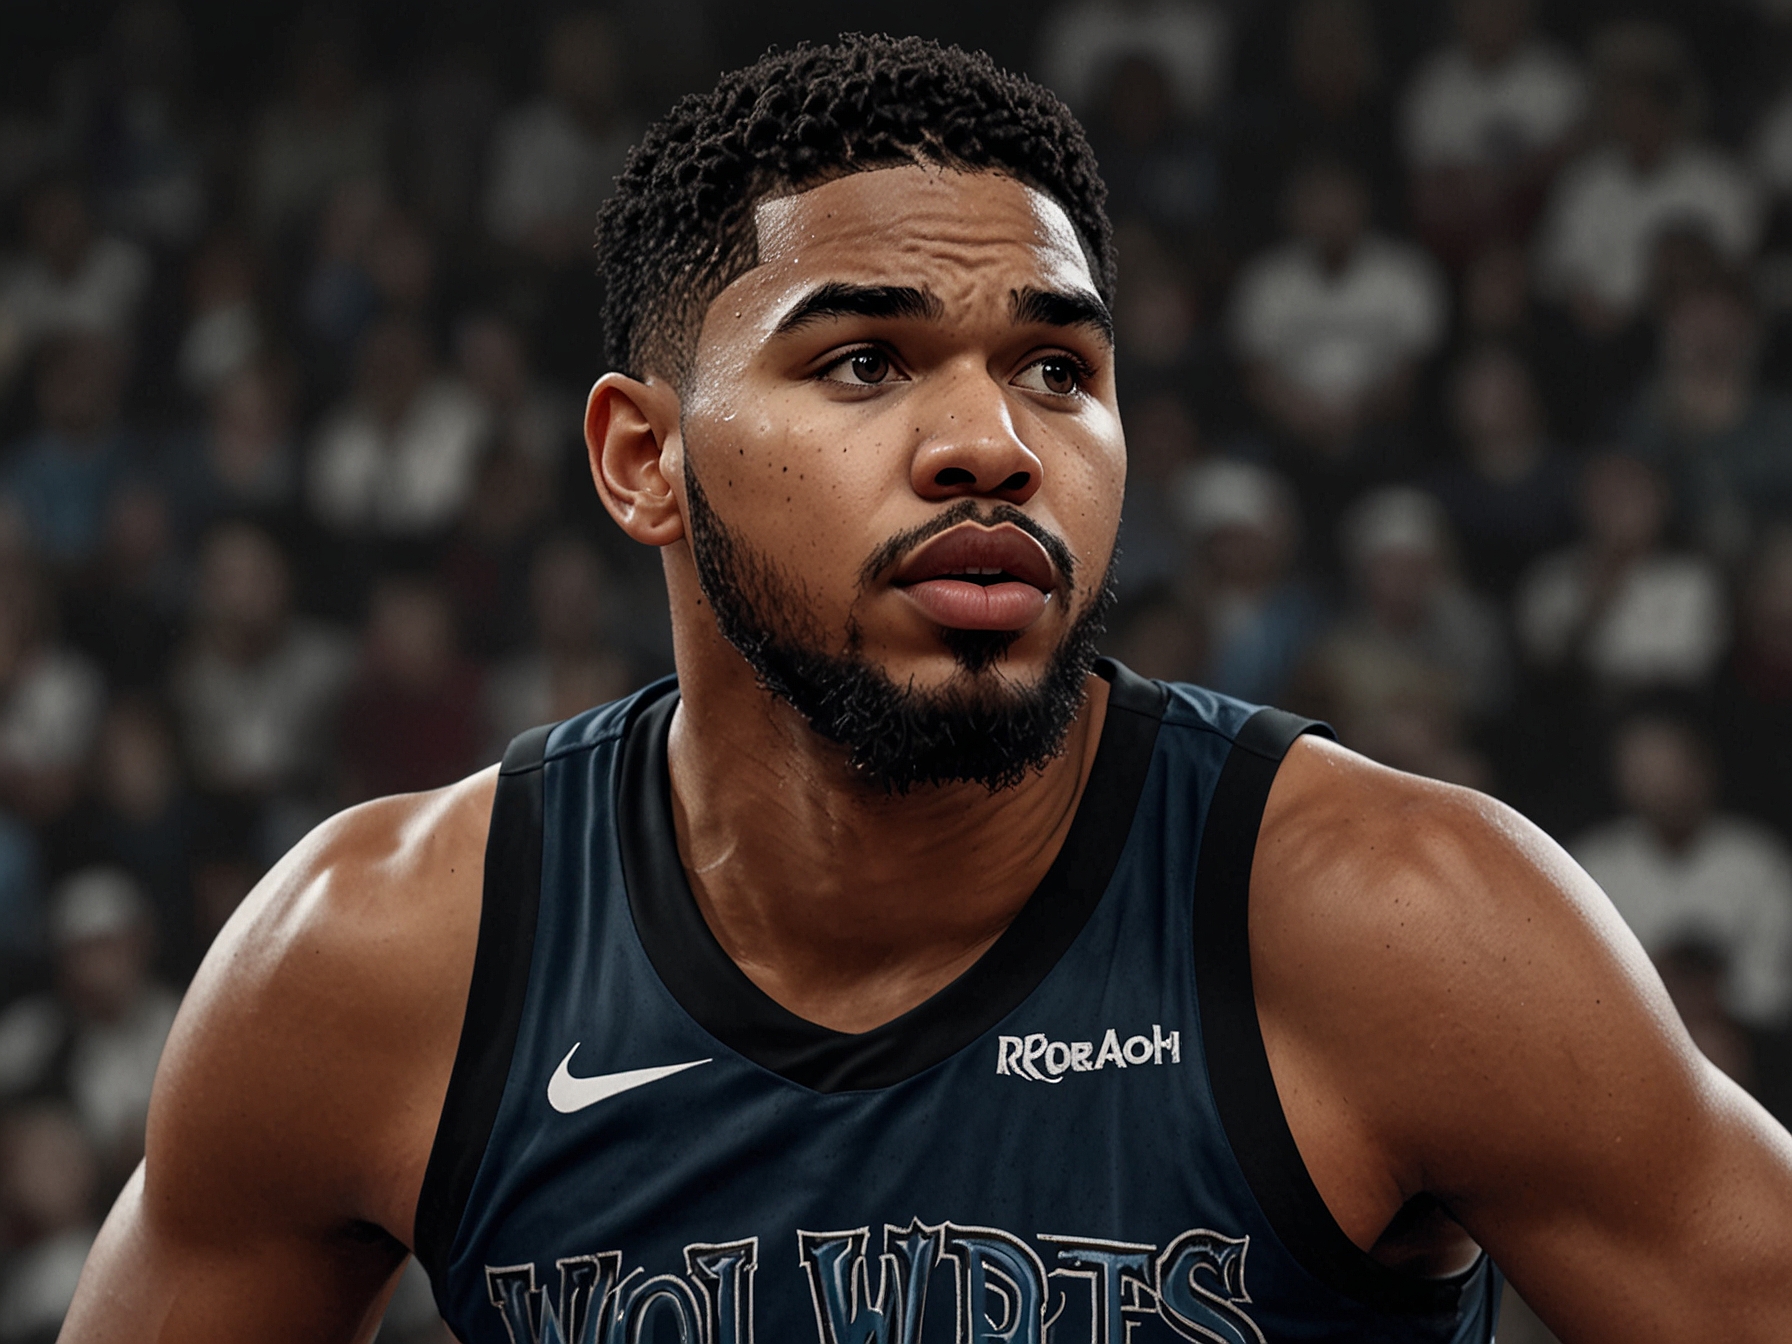 An image illustrating Karl-Anthony Towns playing for the Minnesota Timberwolves, highlighting his versatility and value as a player, which has made him a focal point in trade discussions.